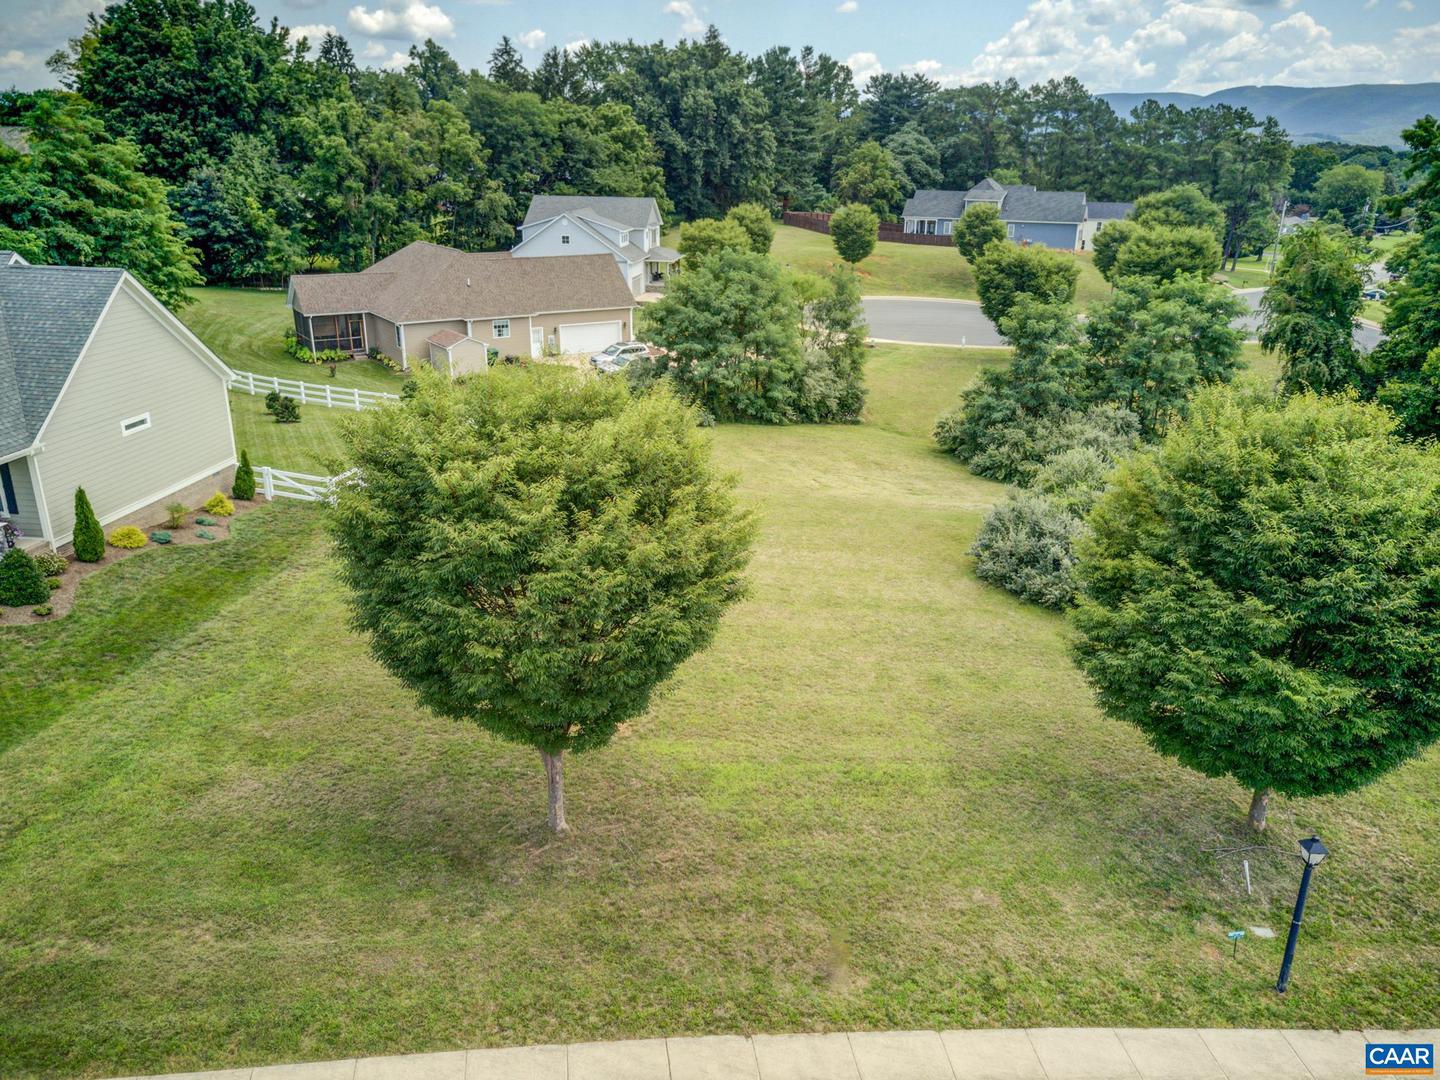 TBD FOREST AVE #17, WAYNESBORO, Virginia 22980, ,Land,For sale,TBD FOREST AVE #17,644745 MLS # 644745